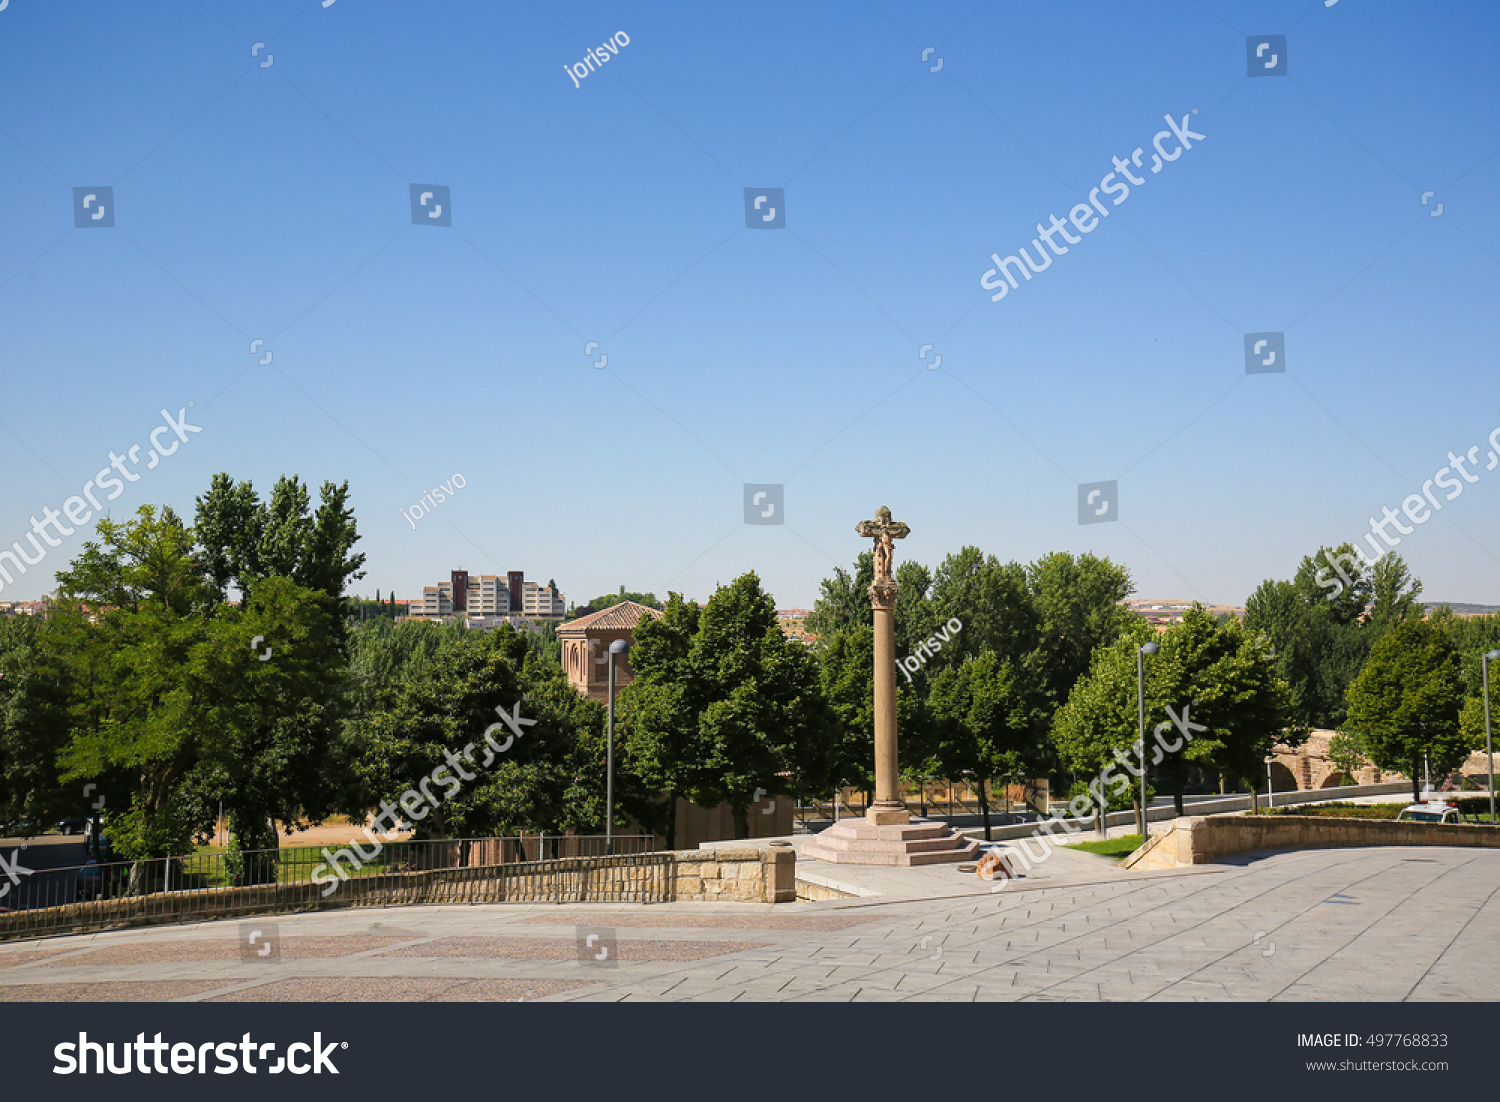 SALAMANCA, SPAIN - AUGUST 3, 2016: View on the medieval Crucero of the Puerta del Rio in the historic center of Salamanca, Spain #497768833